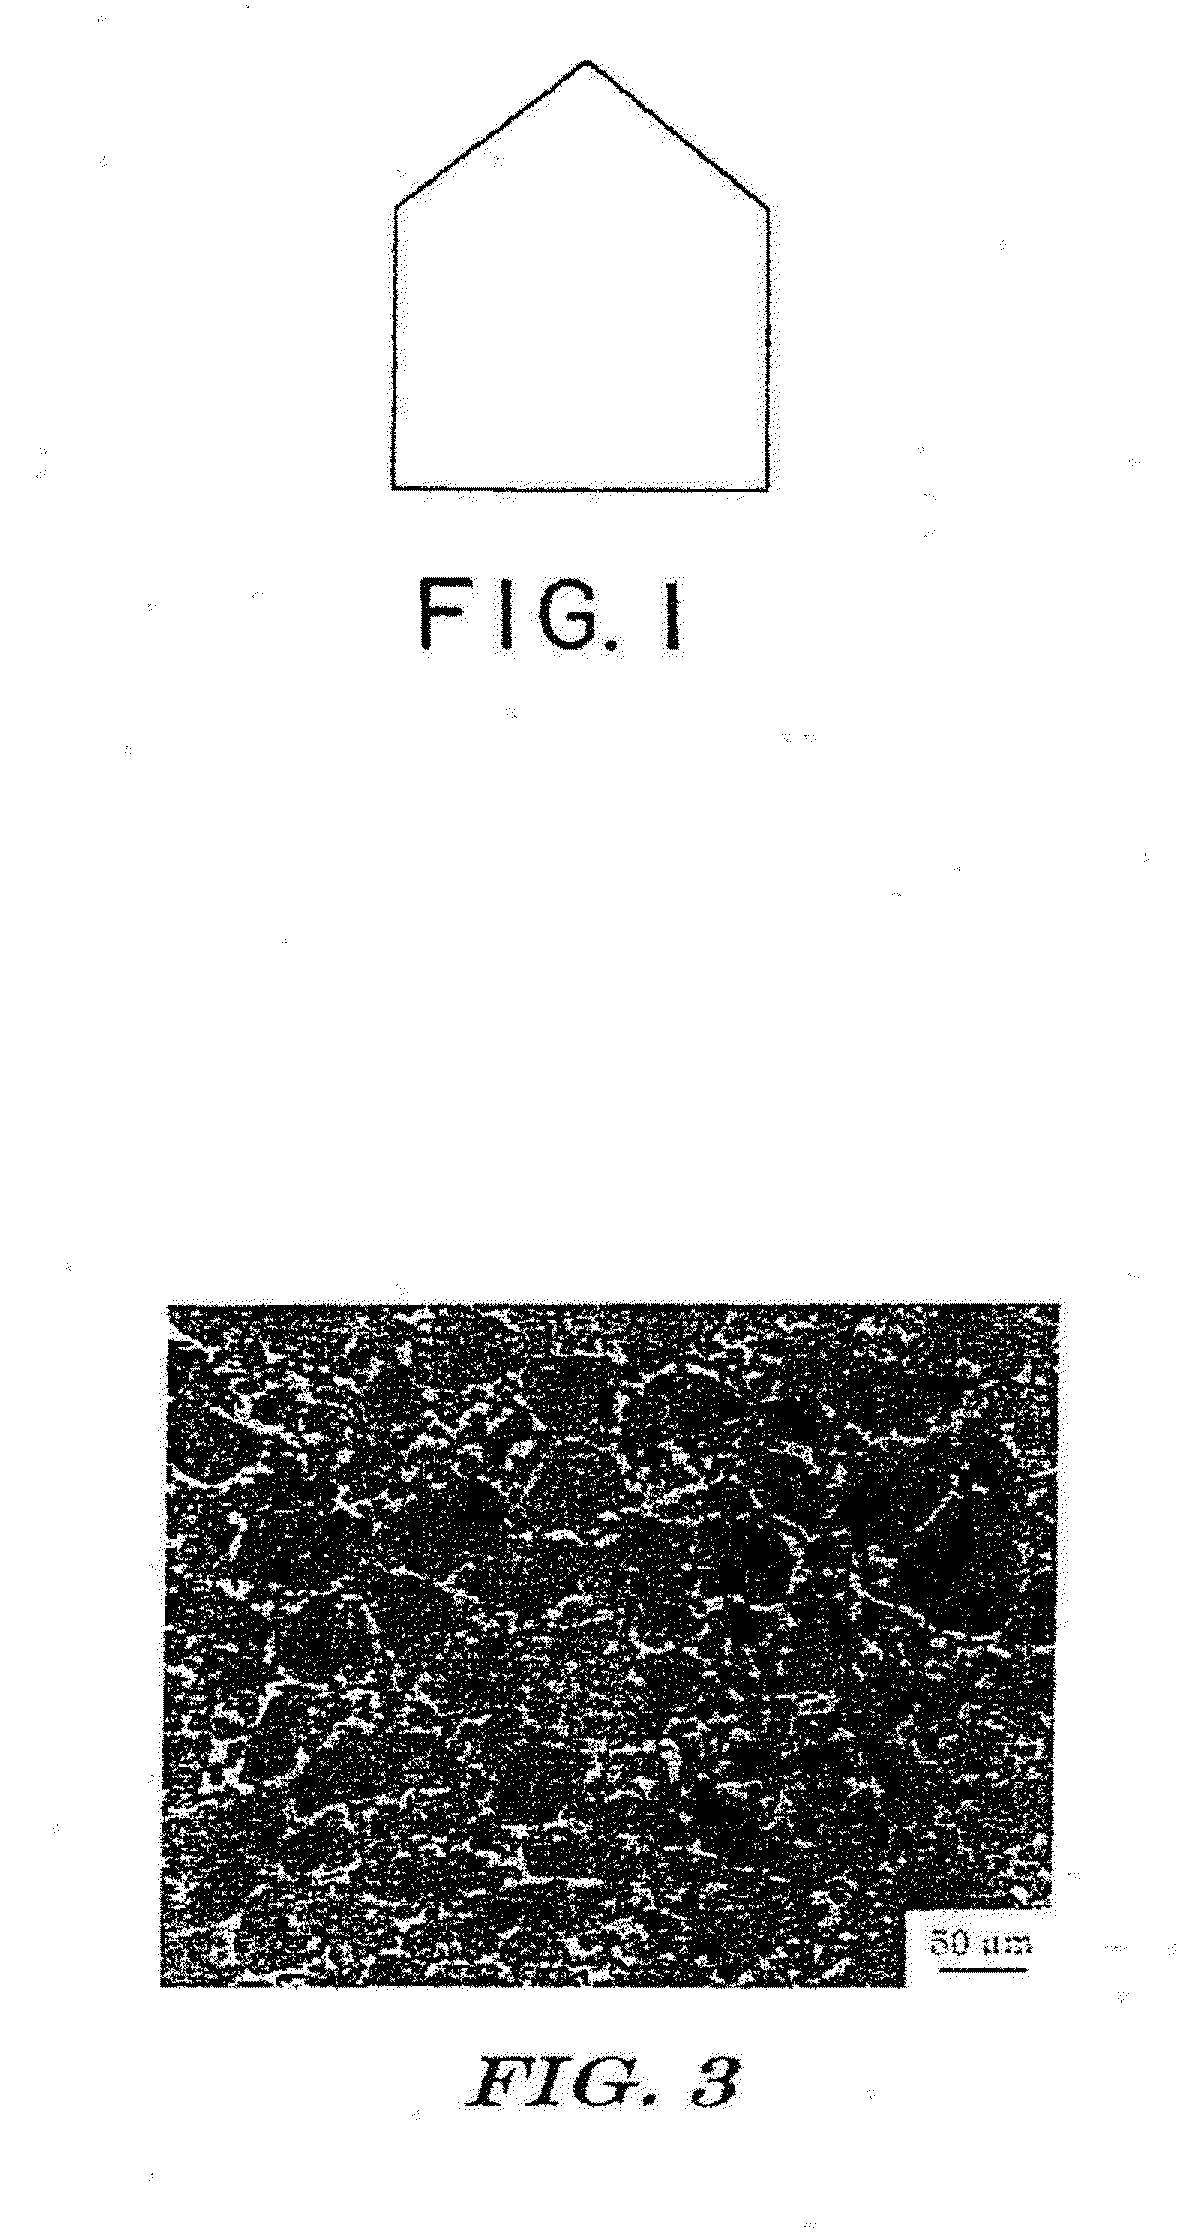 Composite materials and methods for making same